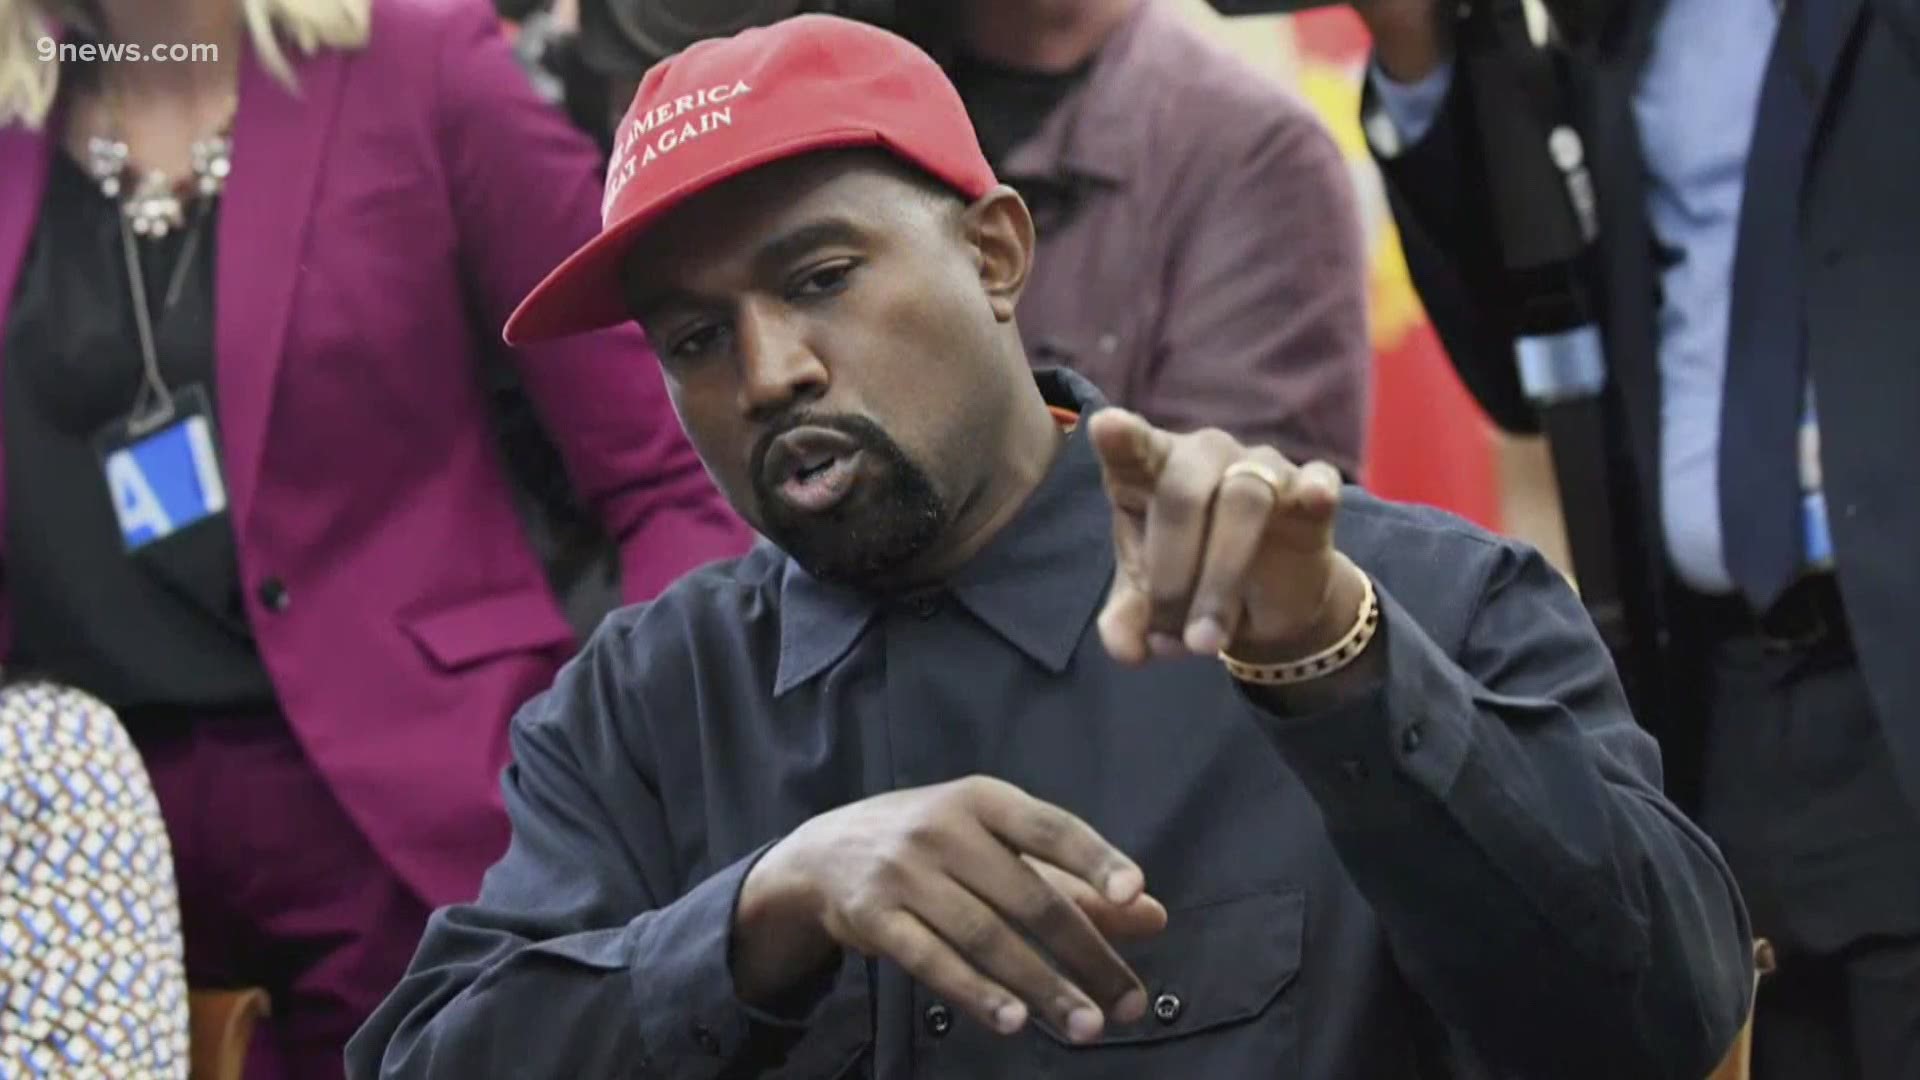 You probably know about Kanye's attempt to get on the Colorado ballot. But what we really need to talk about is the process for getting on Colorado's ballot.